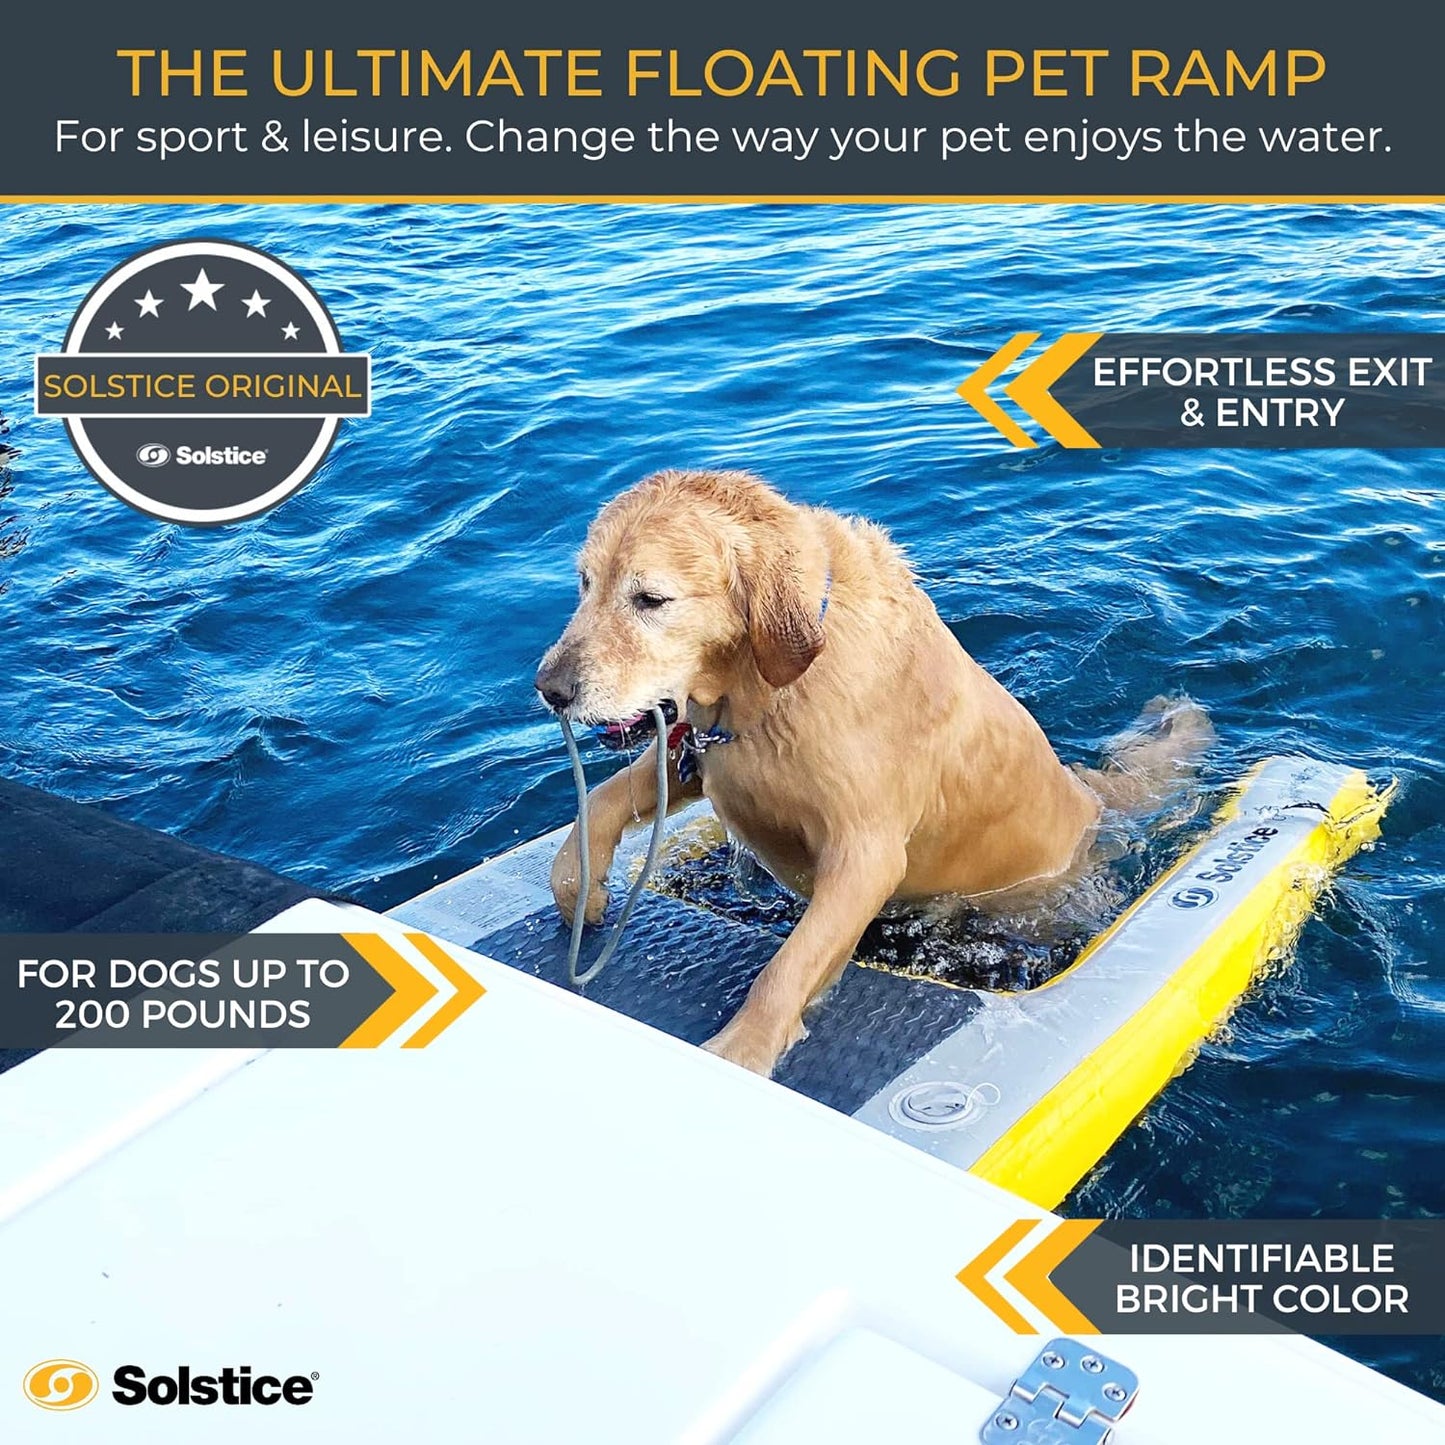 Solstice - Inflatable Pup Plank Dog Float Floating Ramp Ladder For Pools Boats Docks | Dog On Water Ladder Steps | For Swimming Pets Up To 200 Pounds | Claw Friendly Safe & Easy For Large Dogs